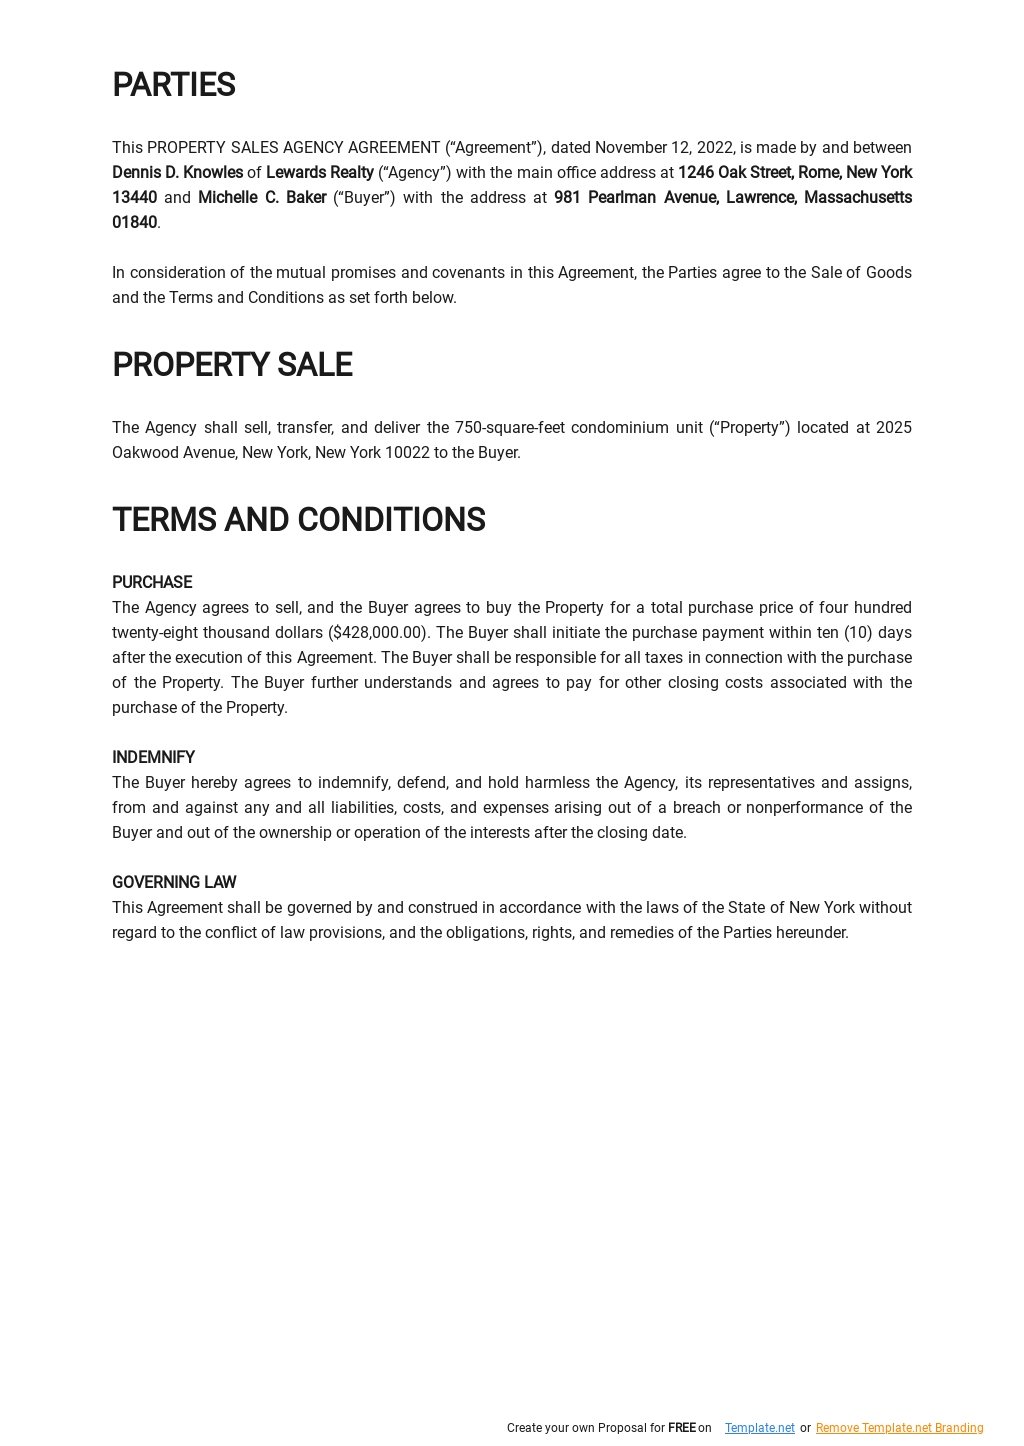 Property Sales Agency Agreement Template 1.jpe